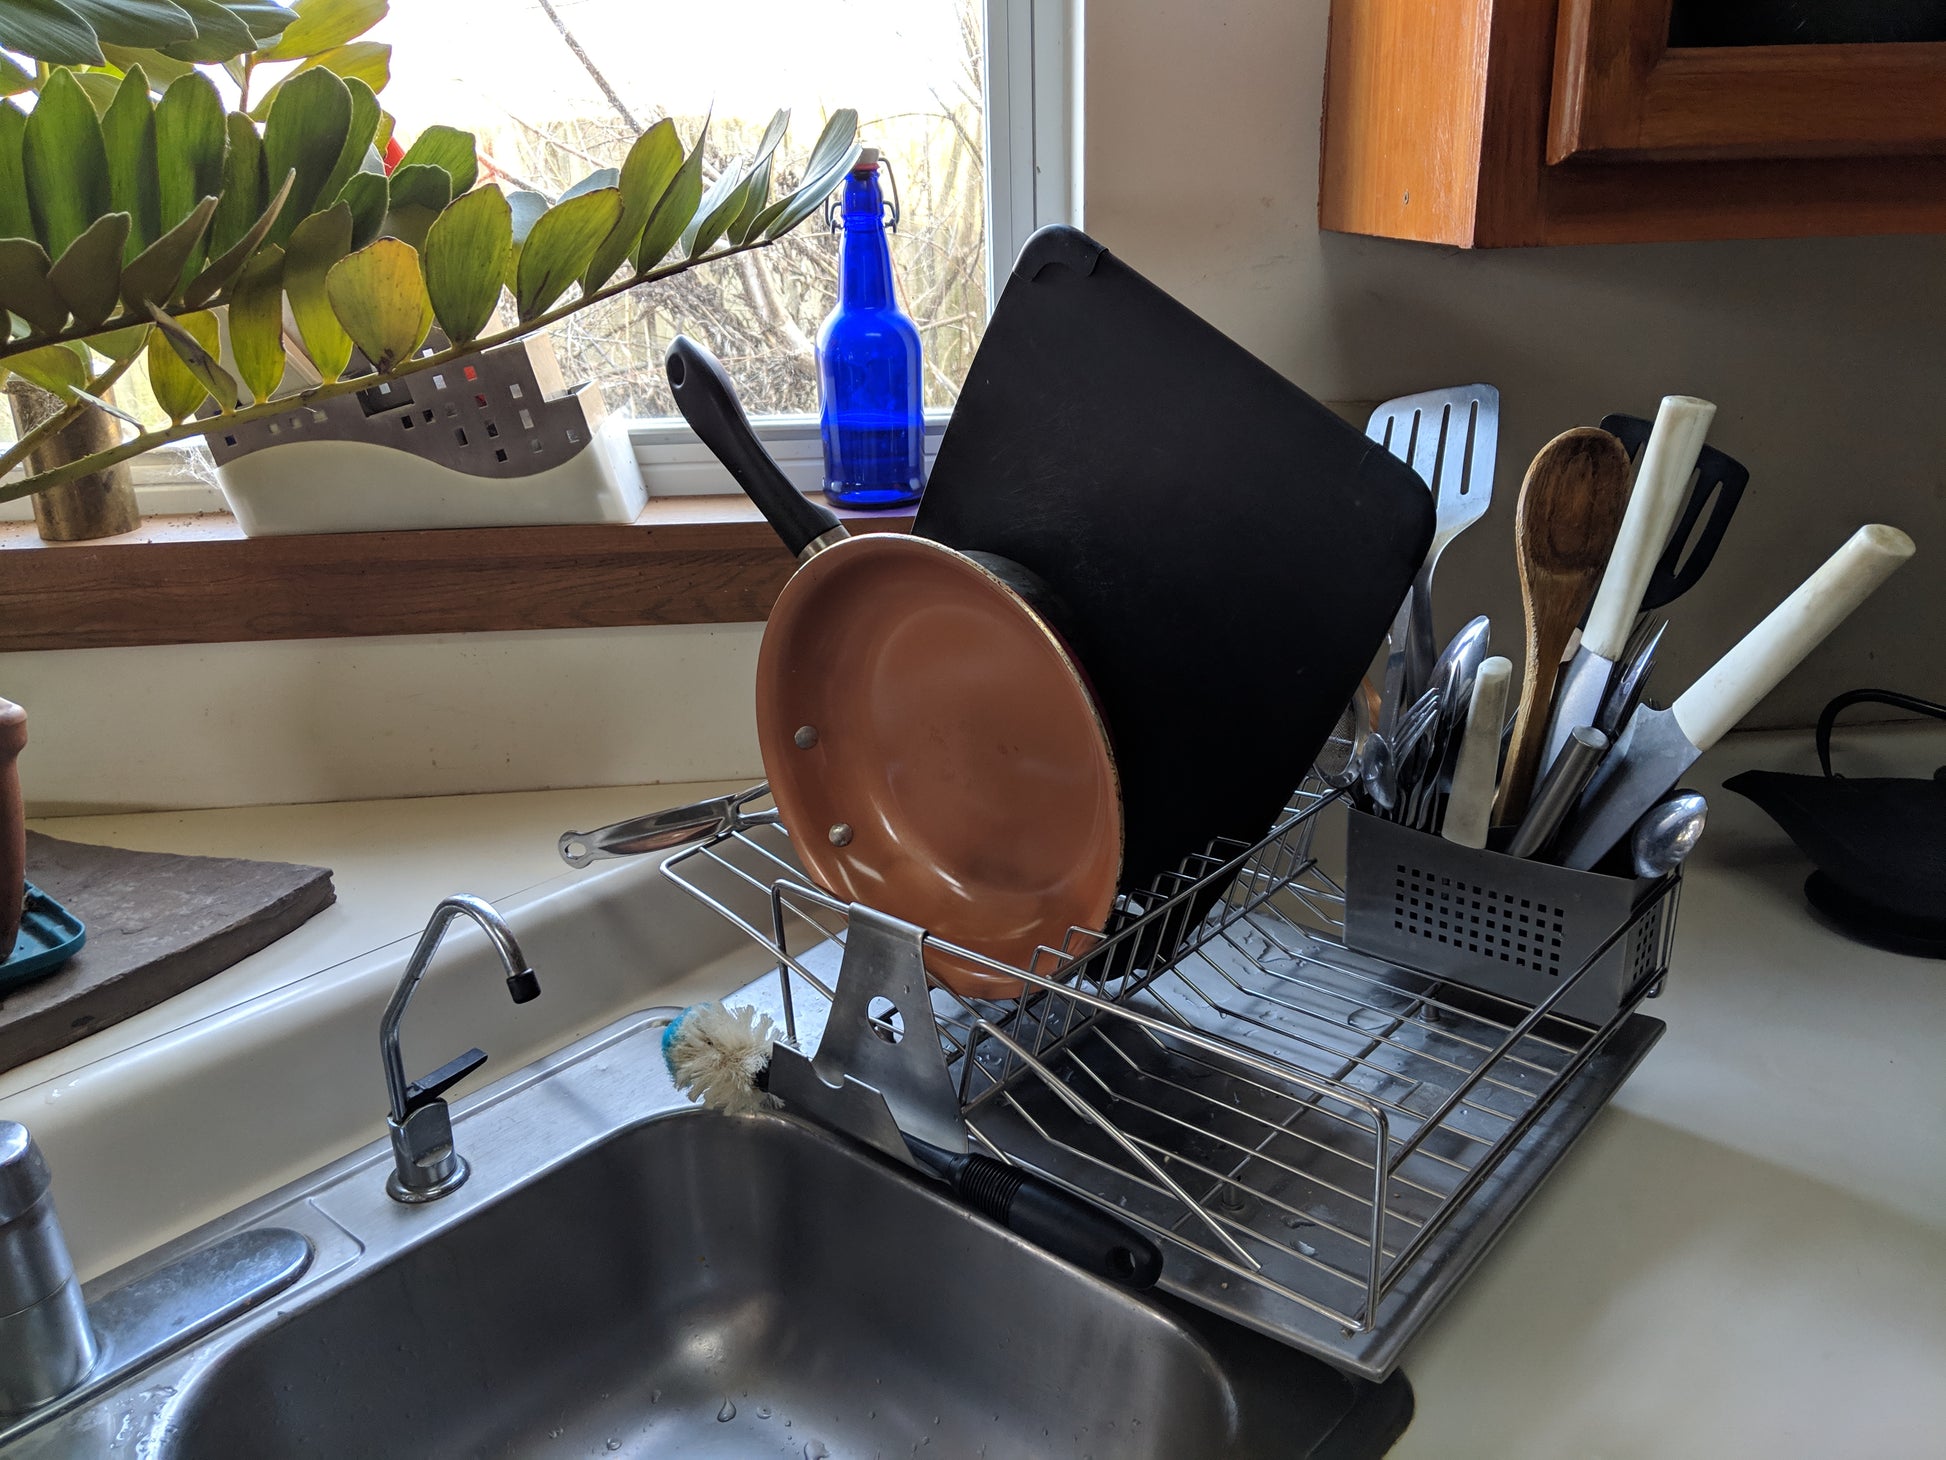 Dish Drying Rack, Over The Sink Dish Drying Rack Stainless Steel